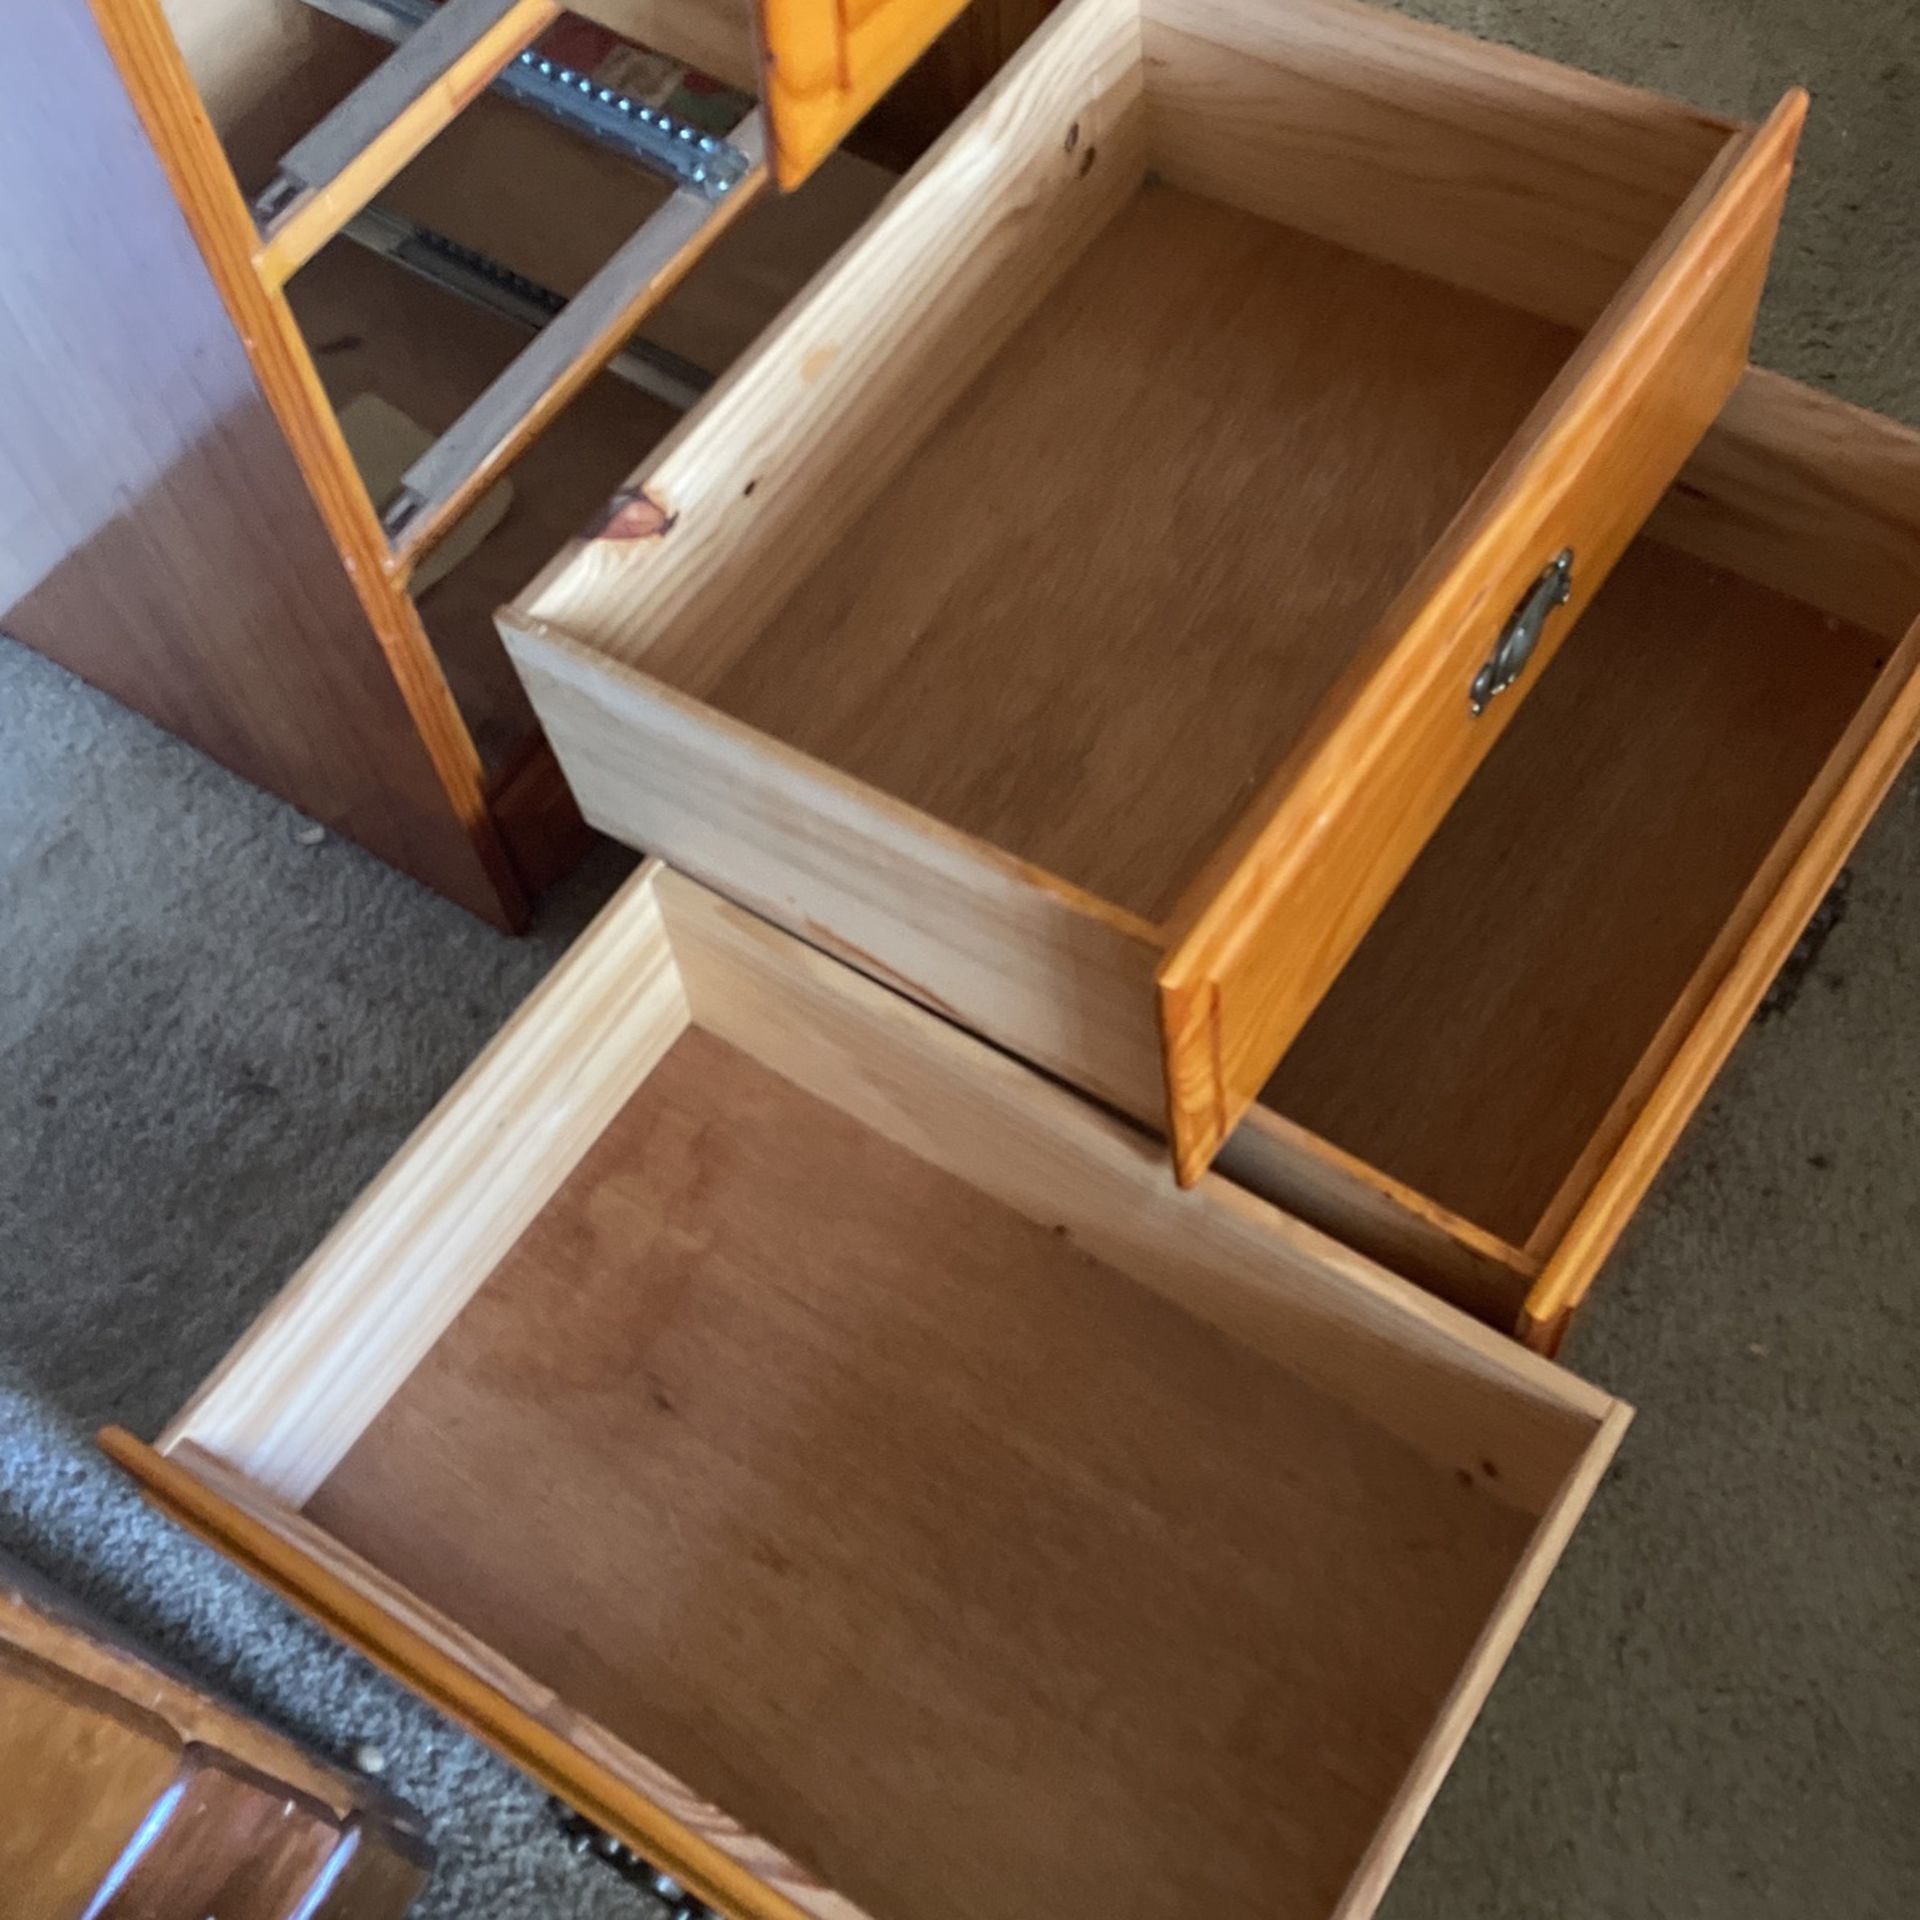 Inside the drawers